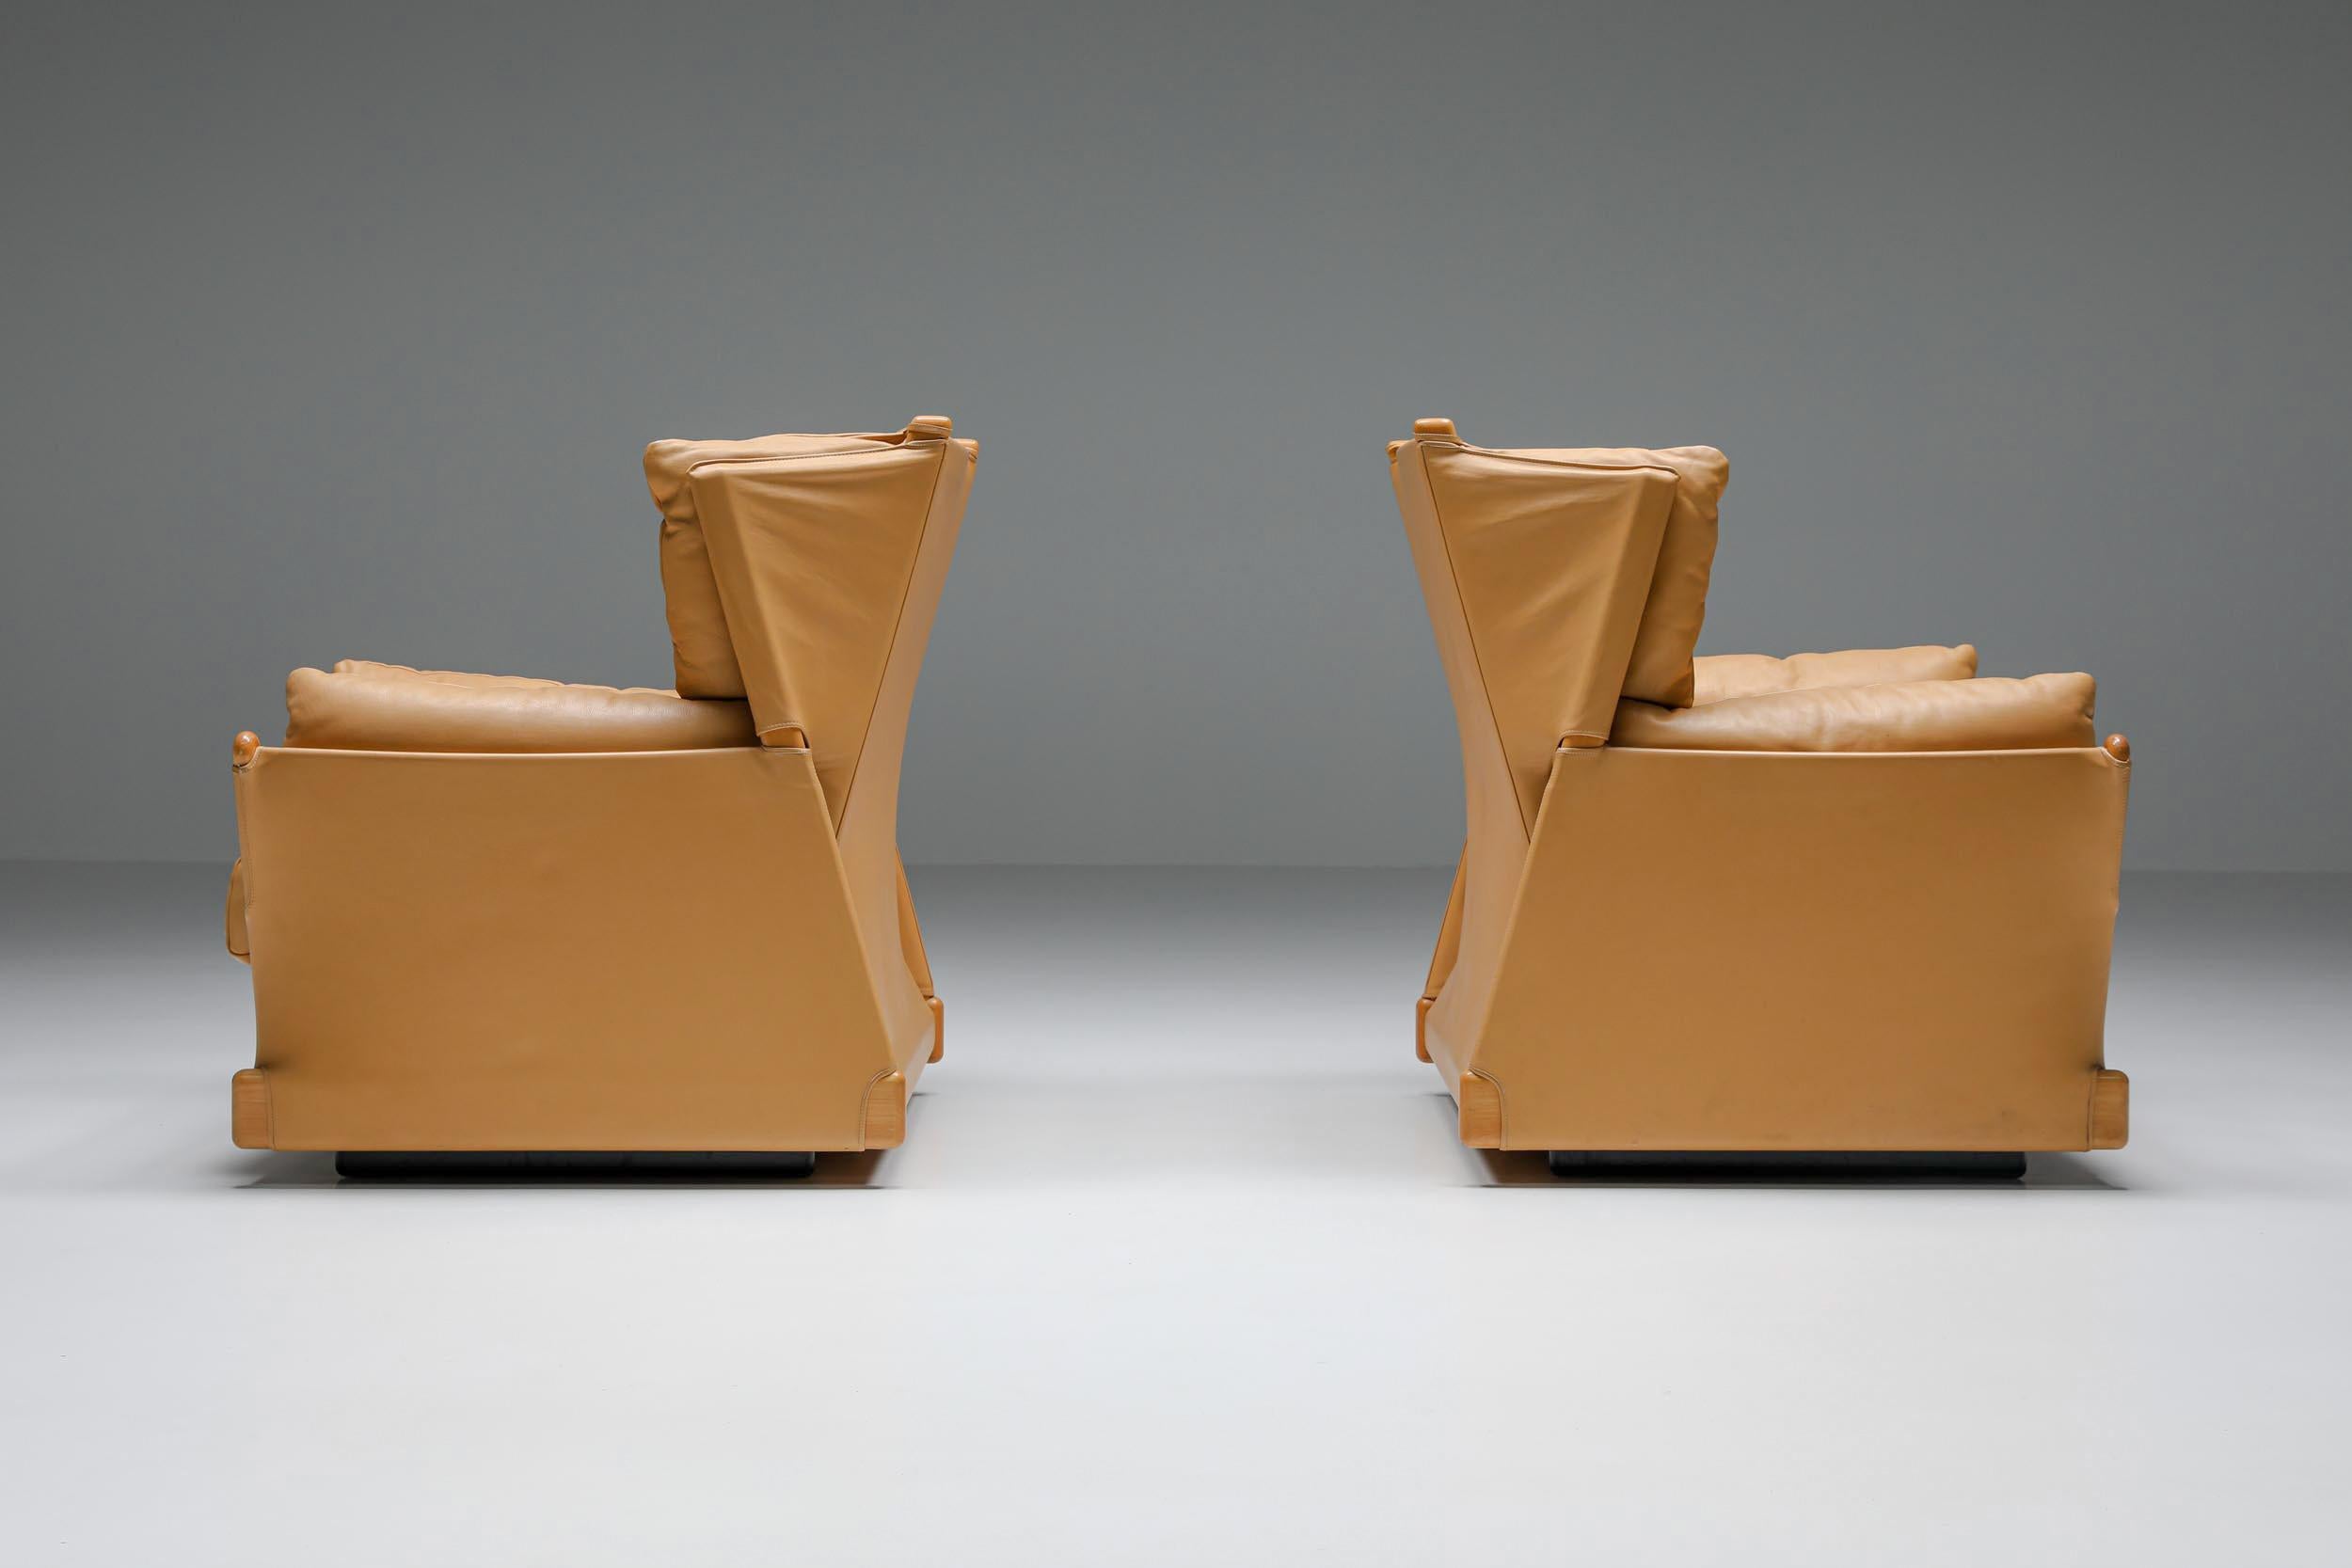 Cassina; 'Viola d'amore' Armchairs; Piero de Martini; Lounge chairs; Postmodern; 1977

Cassina produced these post-modern luxury lounge chairs by Italian designer Piero de Martini. Remarkably comfortable, magnificent camel leather seats in amazing